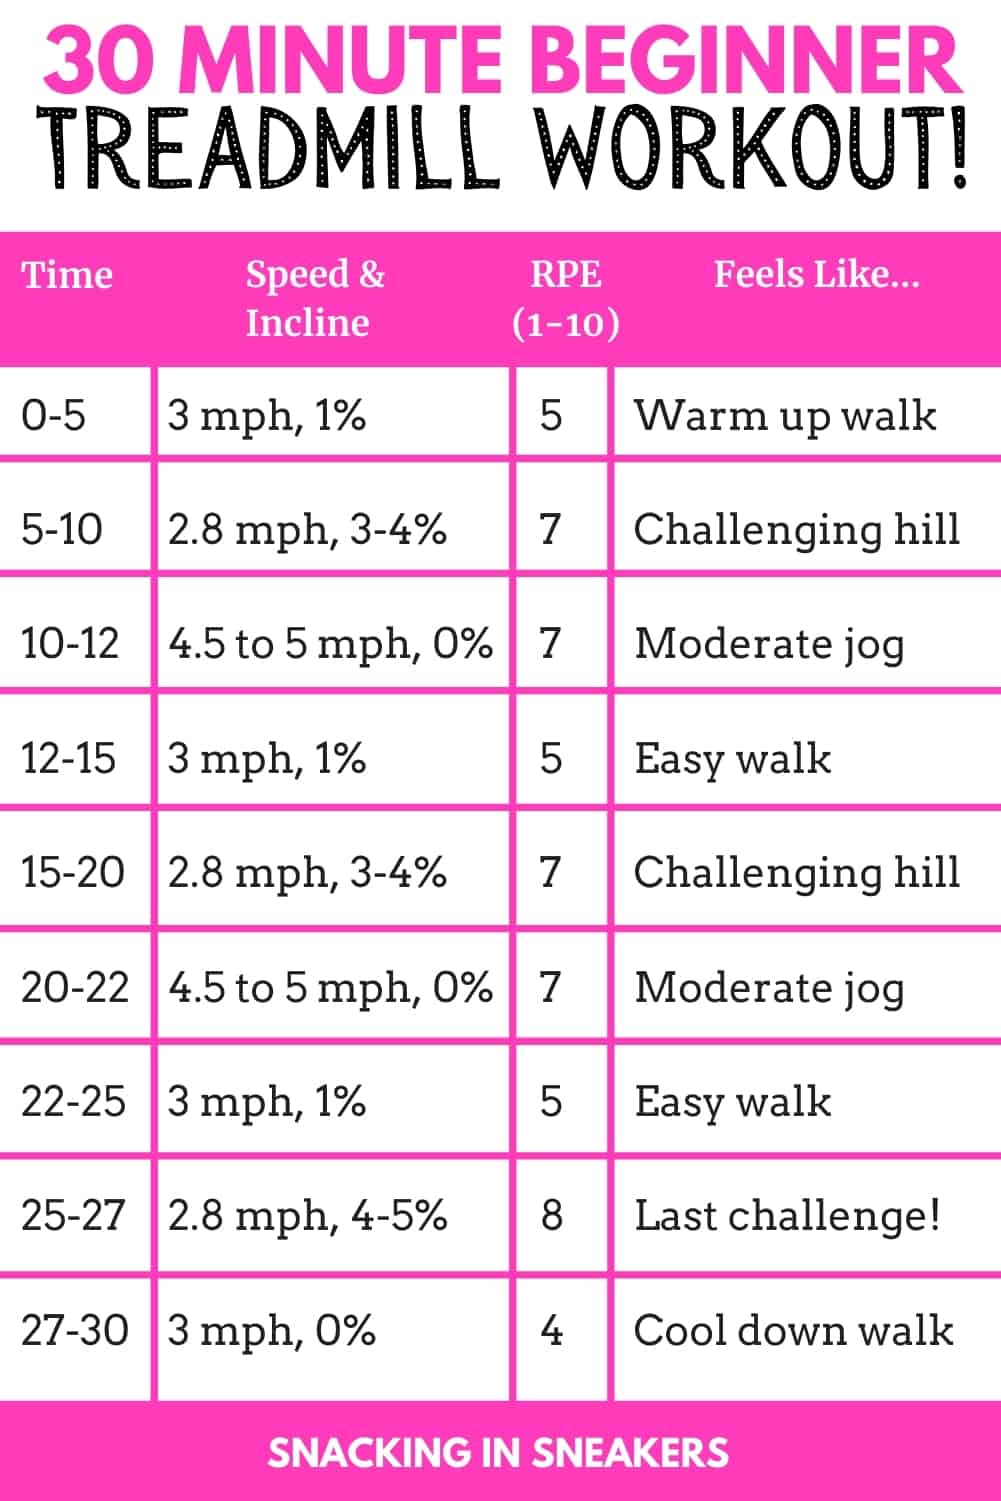 Our Top Three Running Workouts Under 30 Minutes